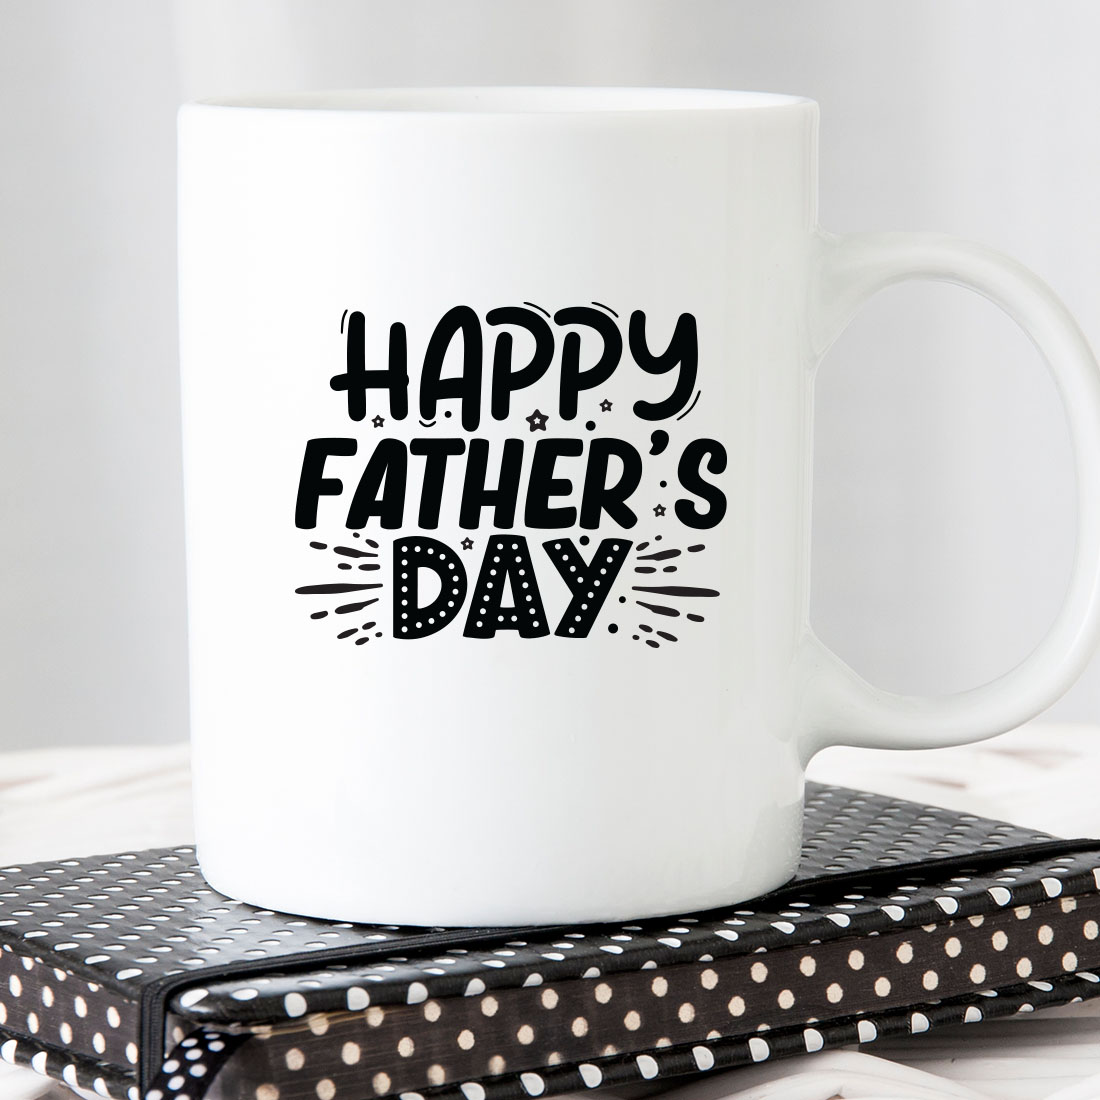 White coffee mug that says happy father's day.